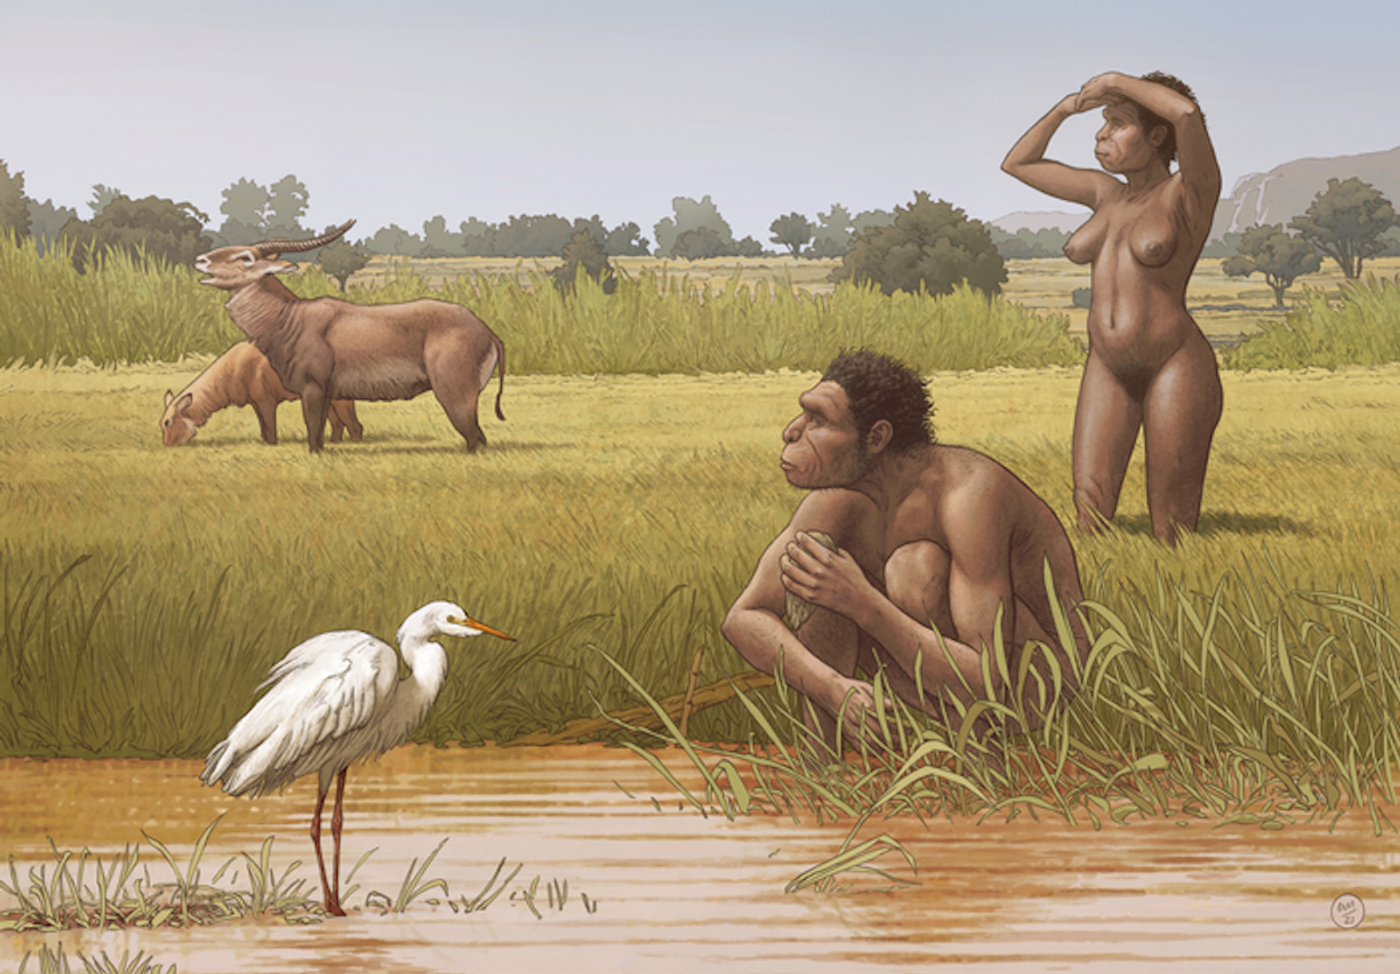 Homo bodoensis, a new species of human ancestor, lived in Africa during the Middle Pleistocene. / Credit: Ettore Mazza